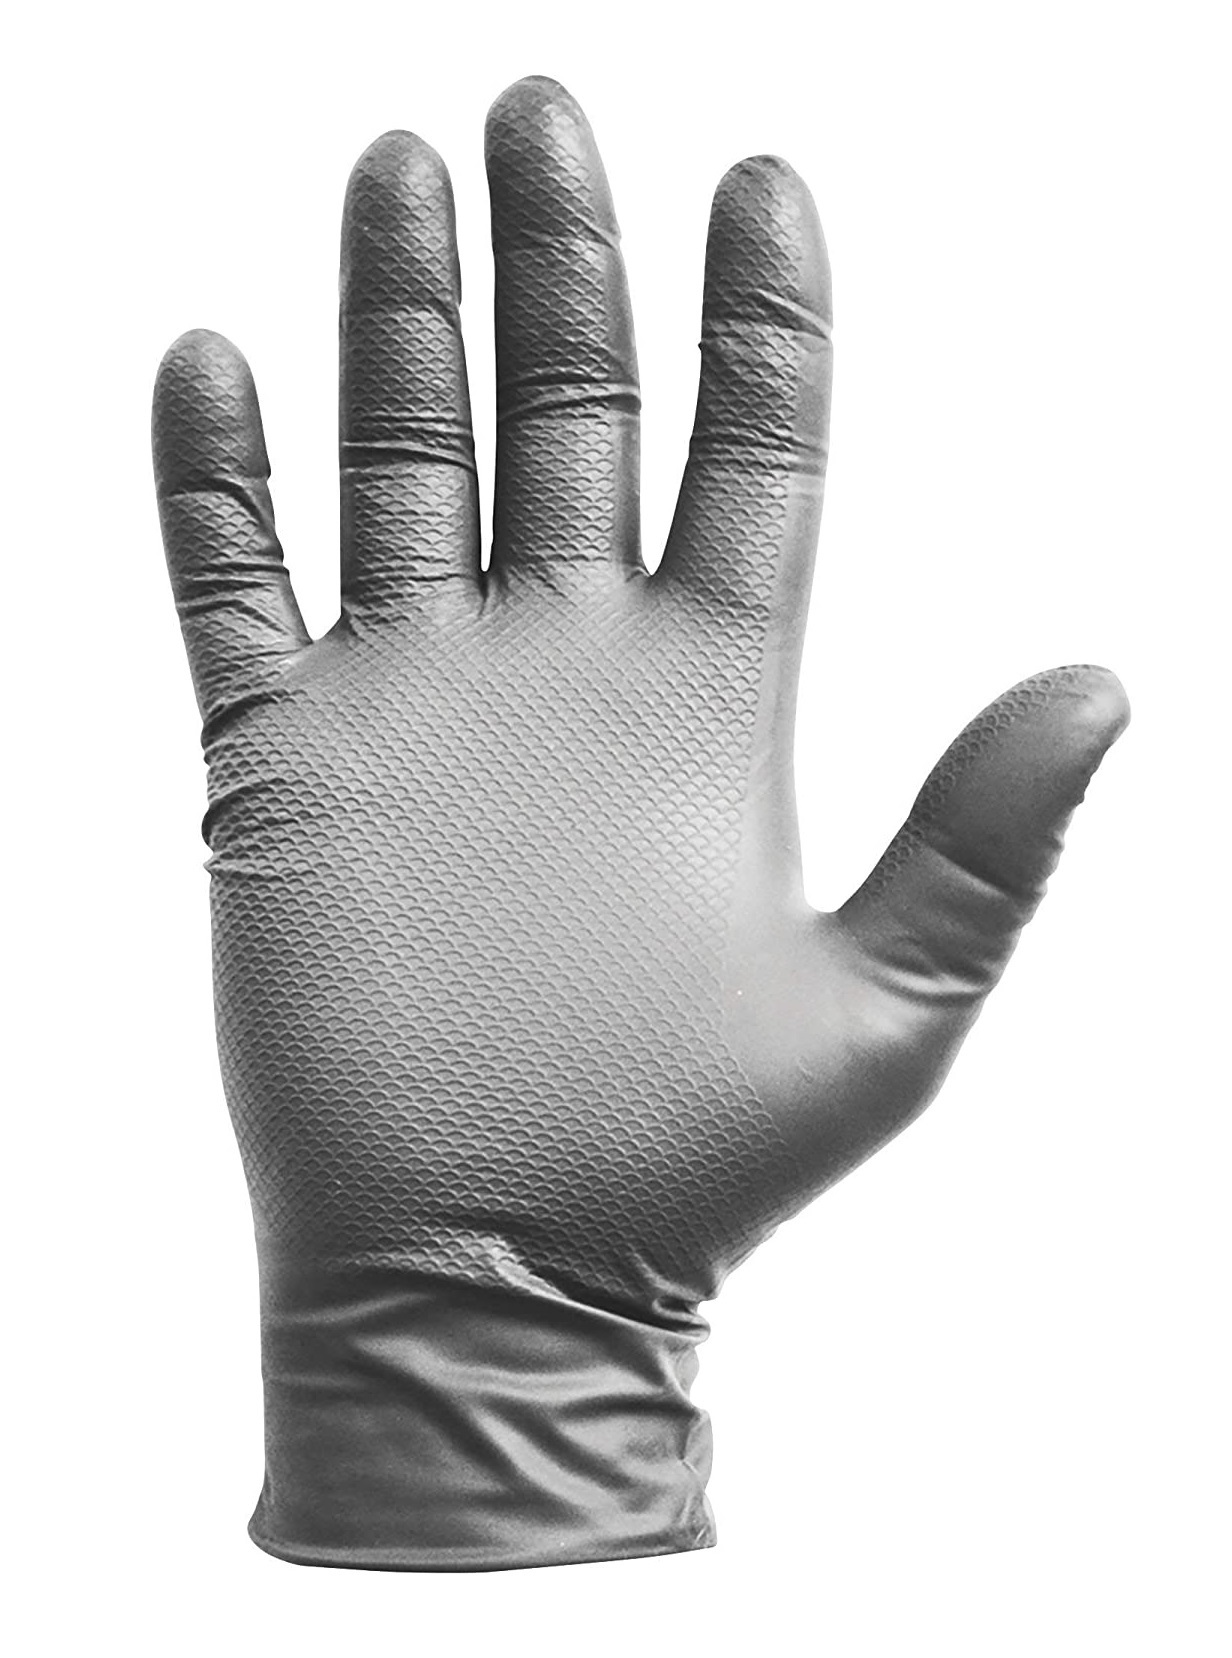 Disposable Nitrile Gloves - 100 Ct. by Grease Monkey at Fleet Farm